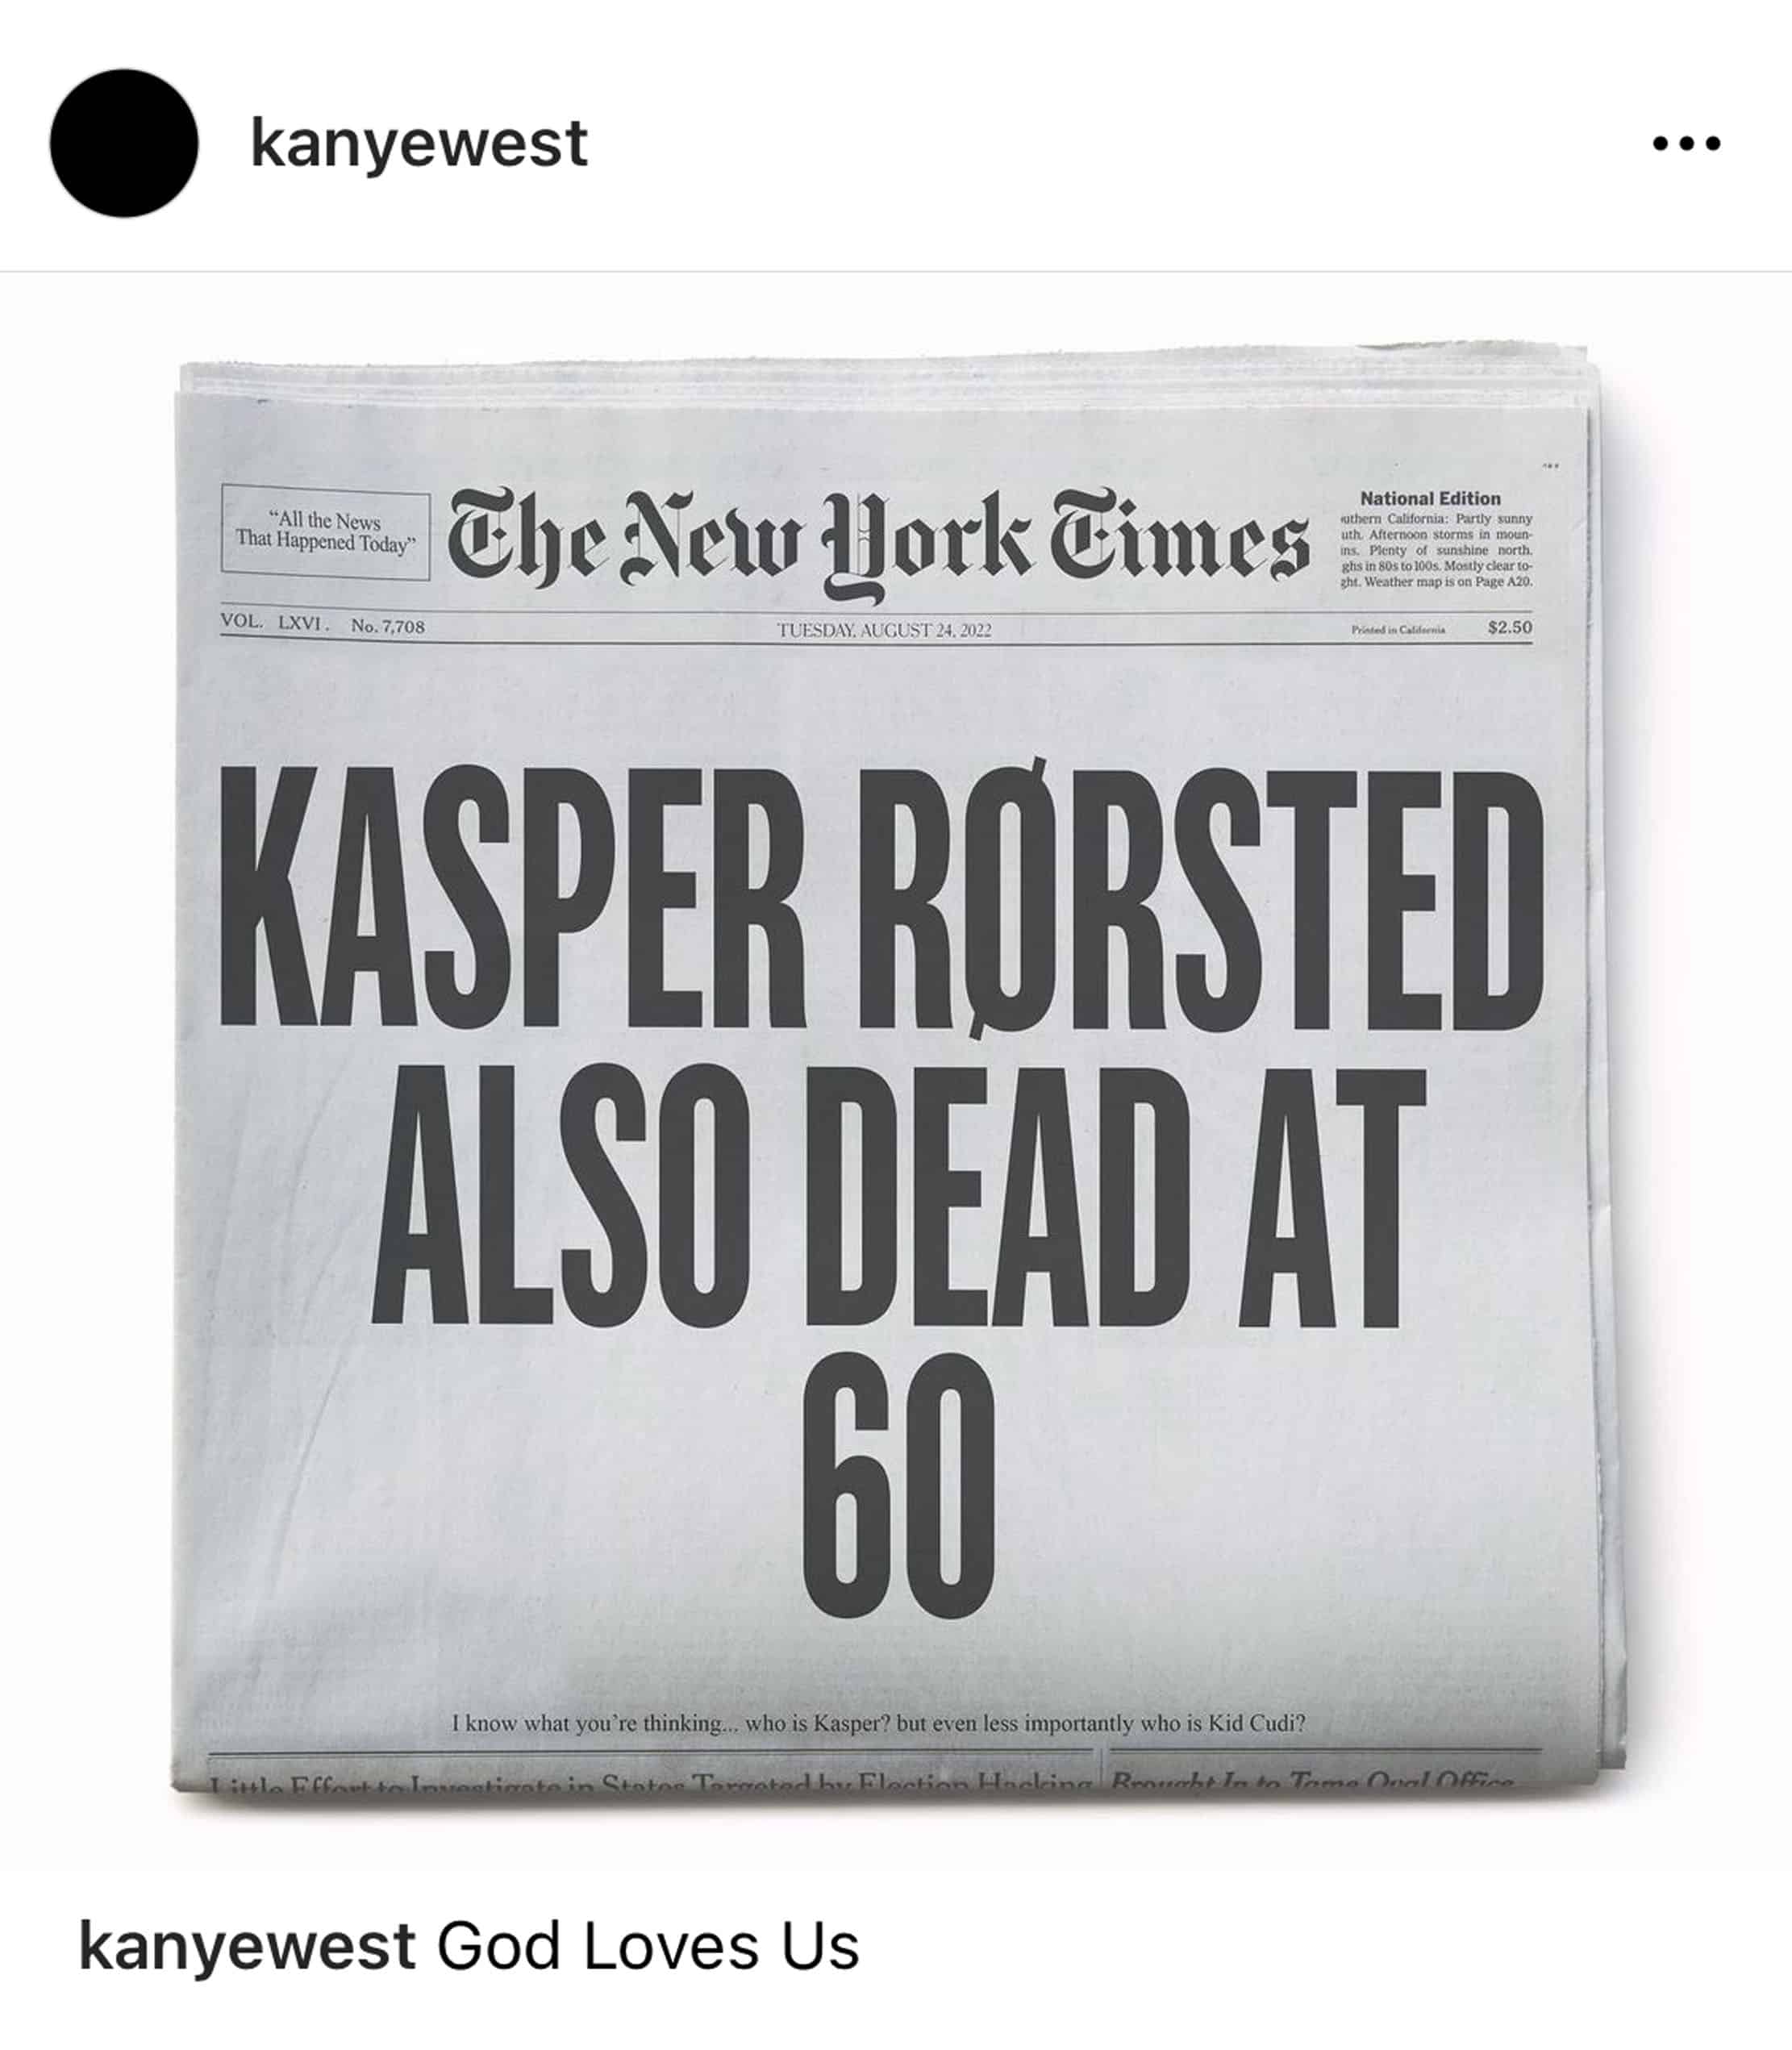 adidas ceo kasper rorsted also dead at 60 kanye west instagram the new york times yeezy